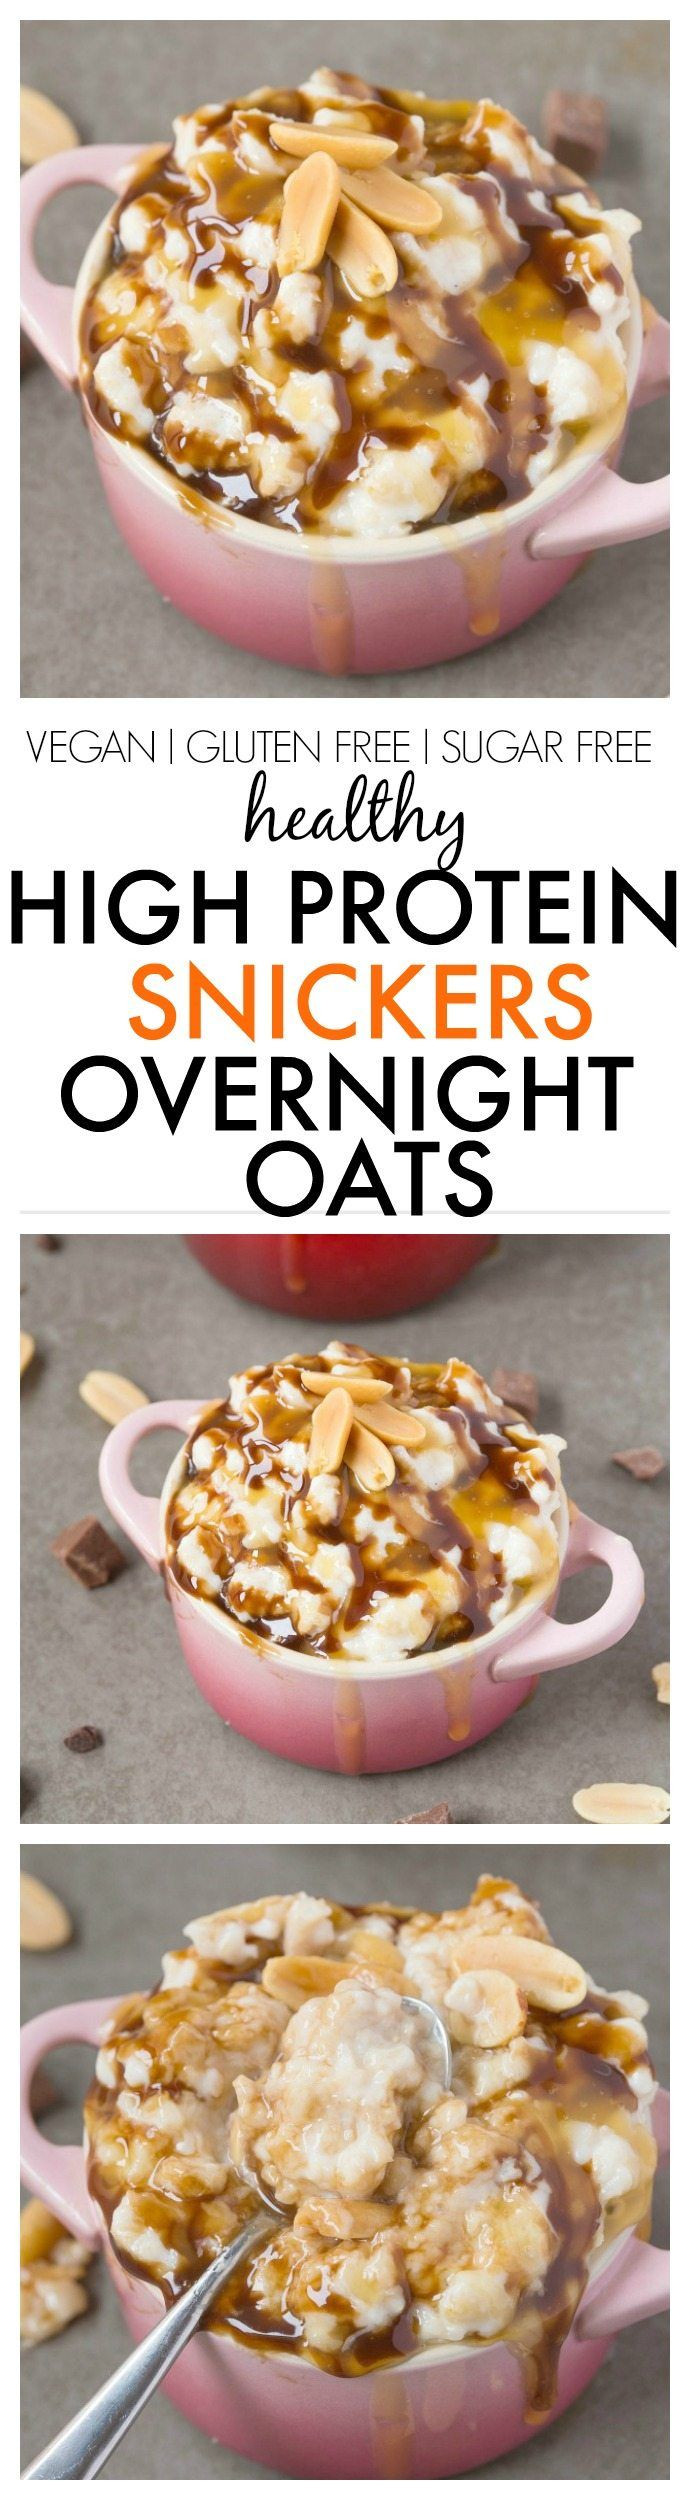 Healthy High Protein Breakfast Ideas
 Healthy High Protein Snickers Overnight Oats Easy